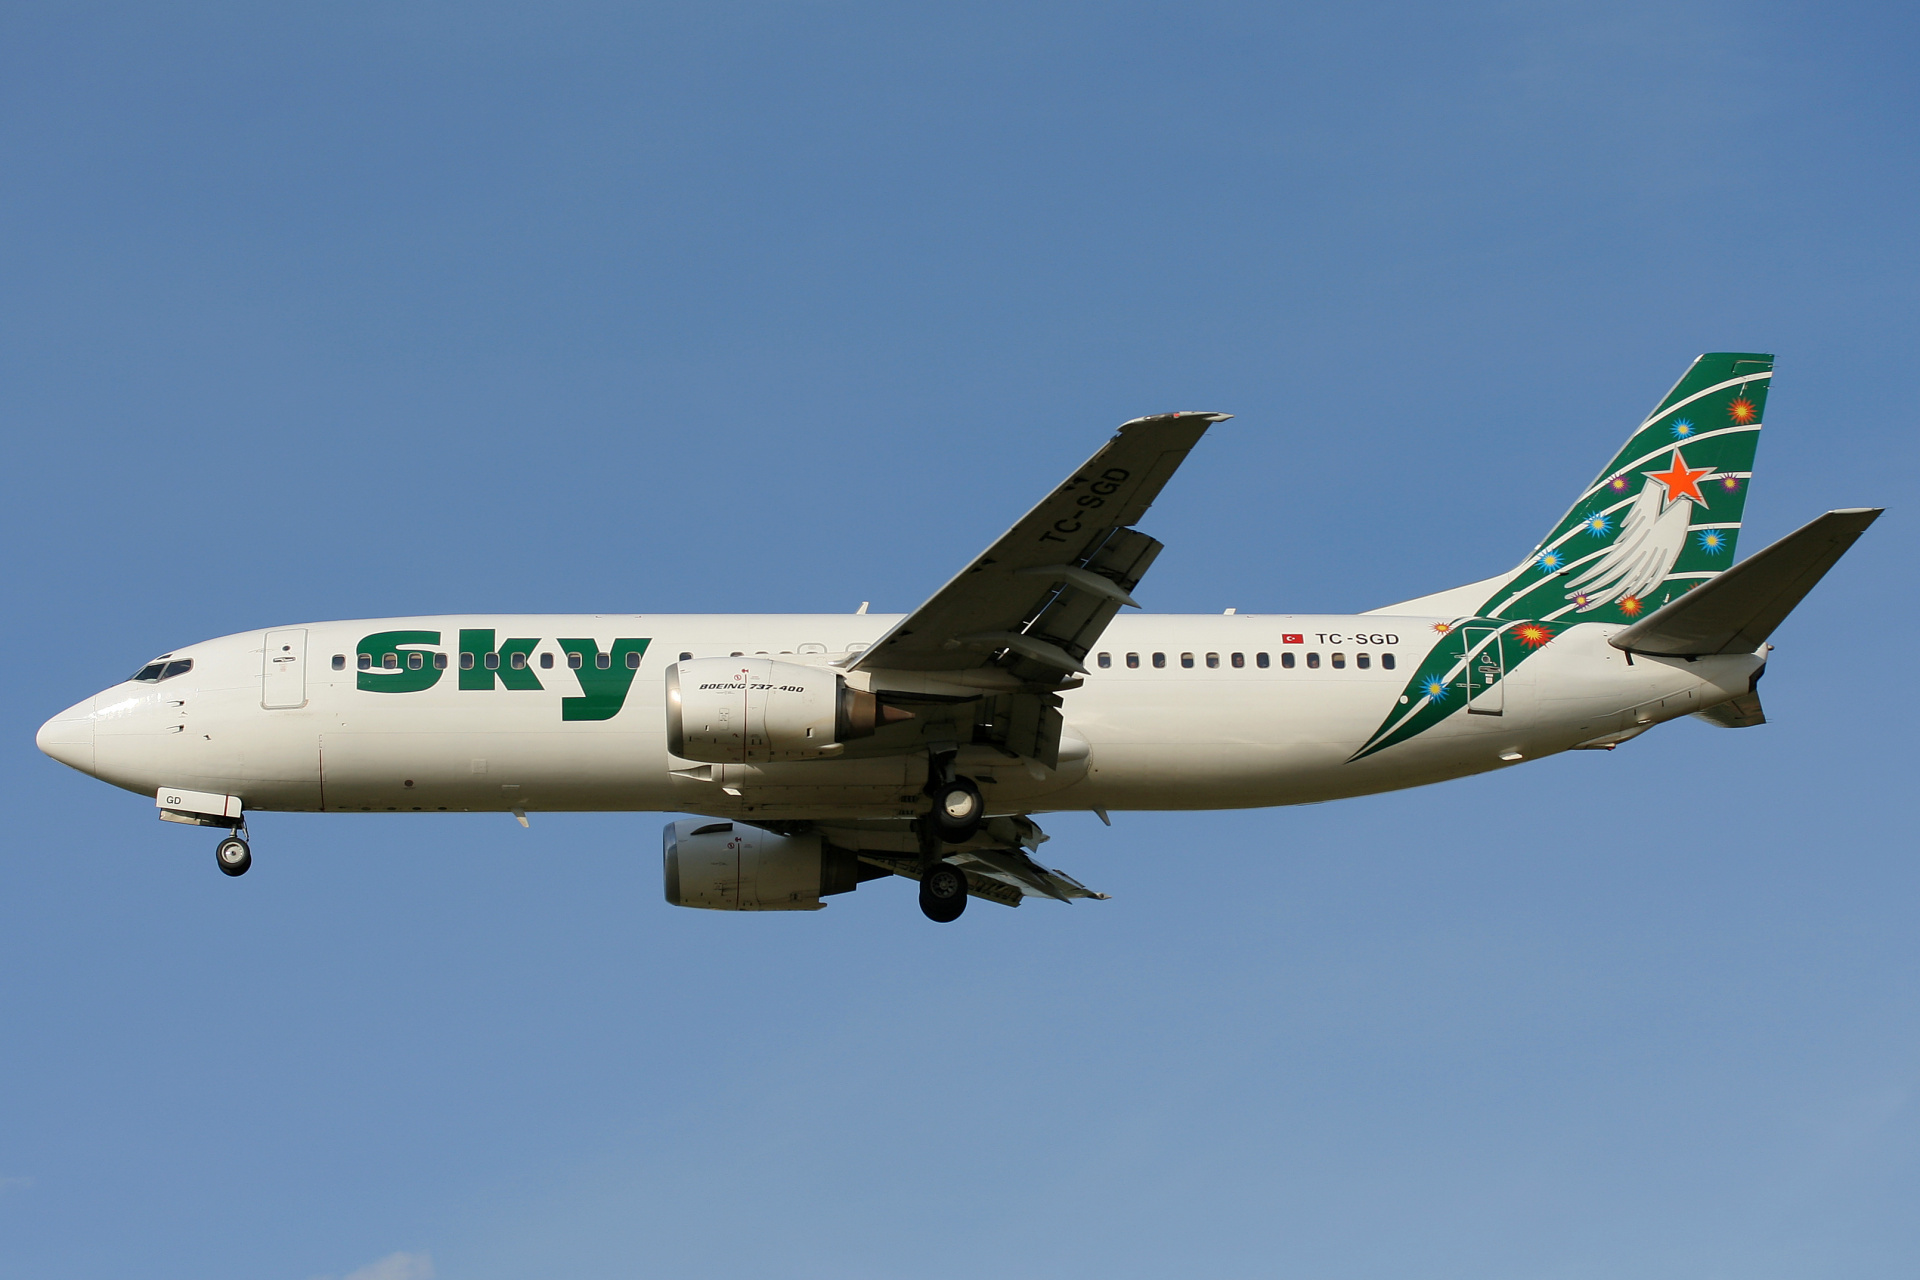 TC-SGD, Sky Airlines (Aircraft » EPWA Spotting » Boeing 737-400)